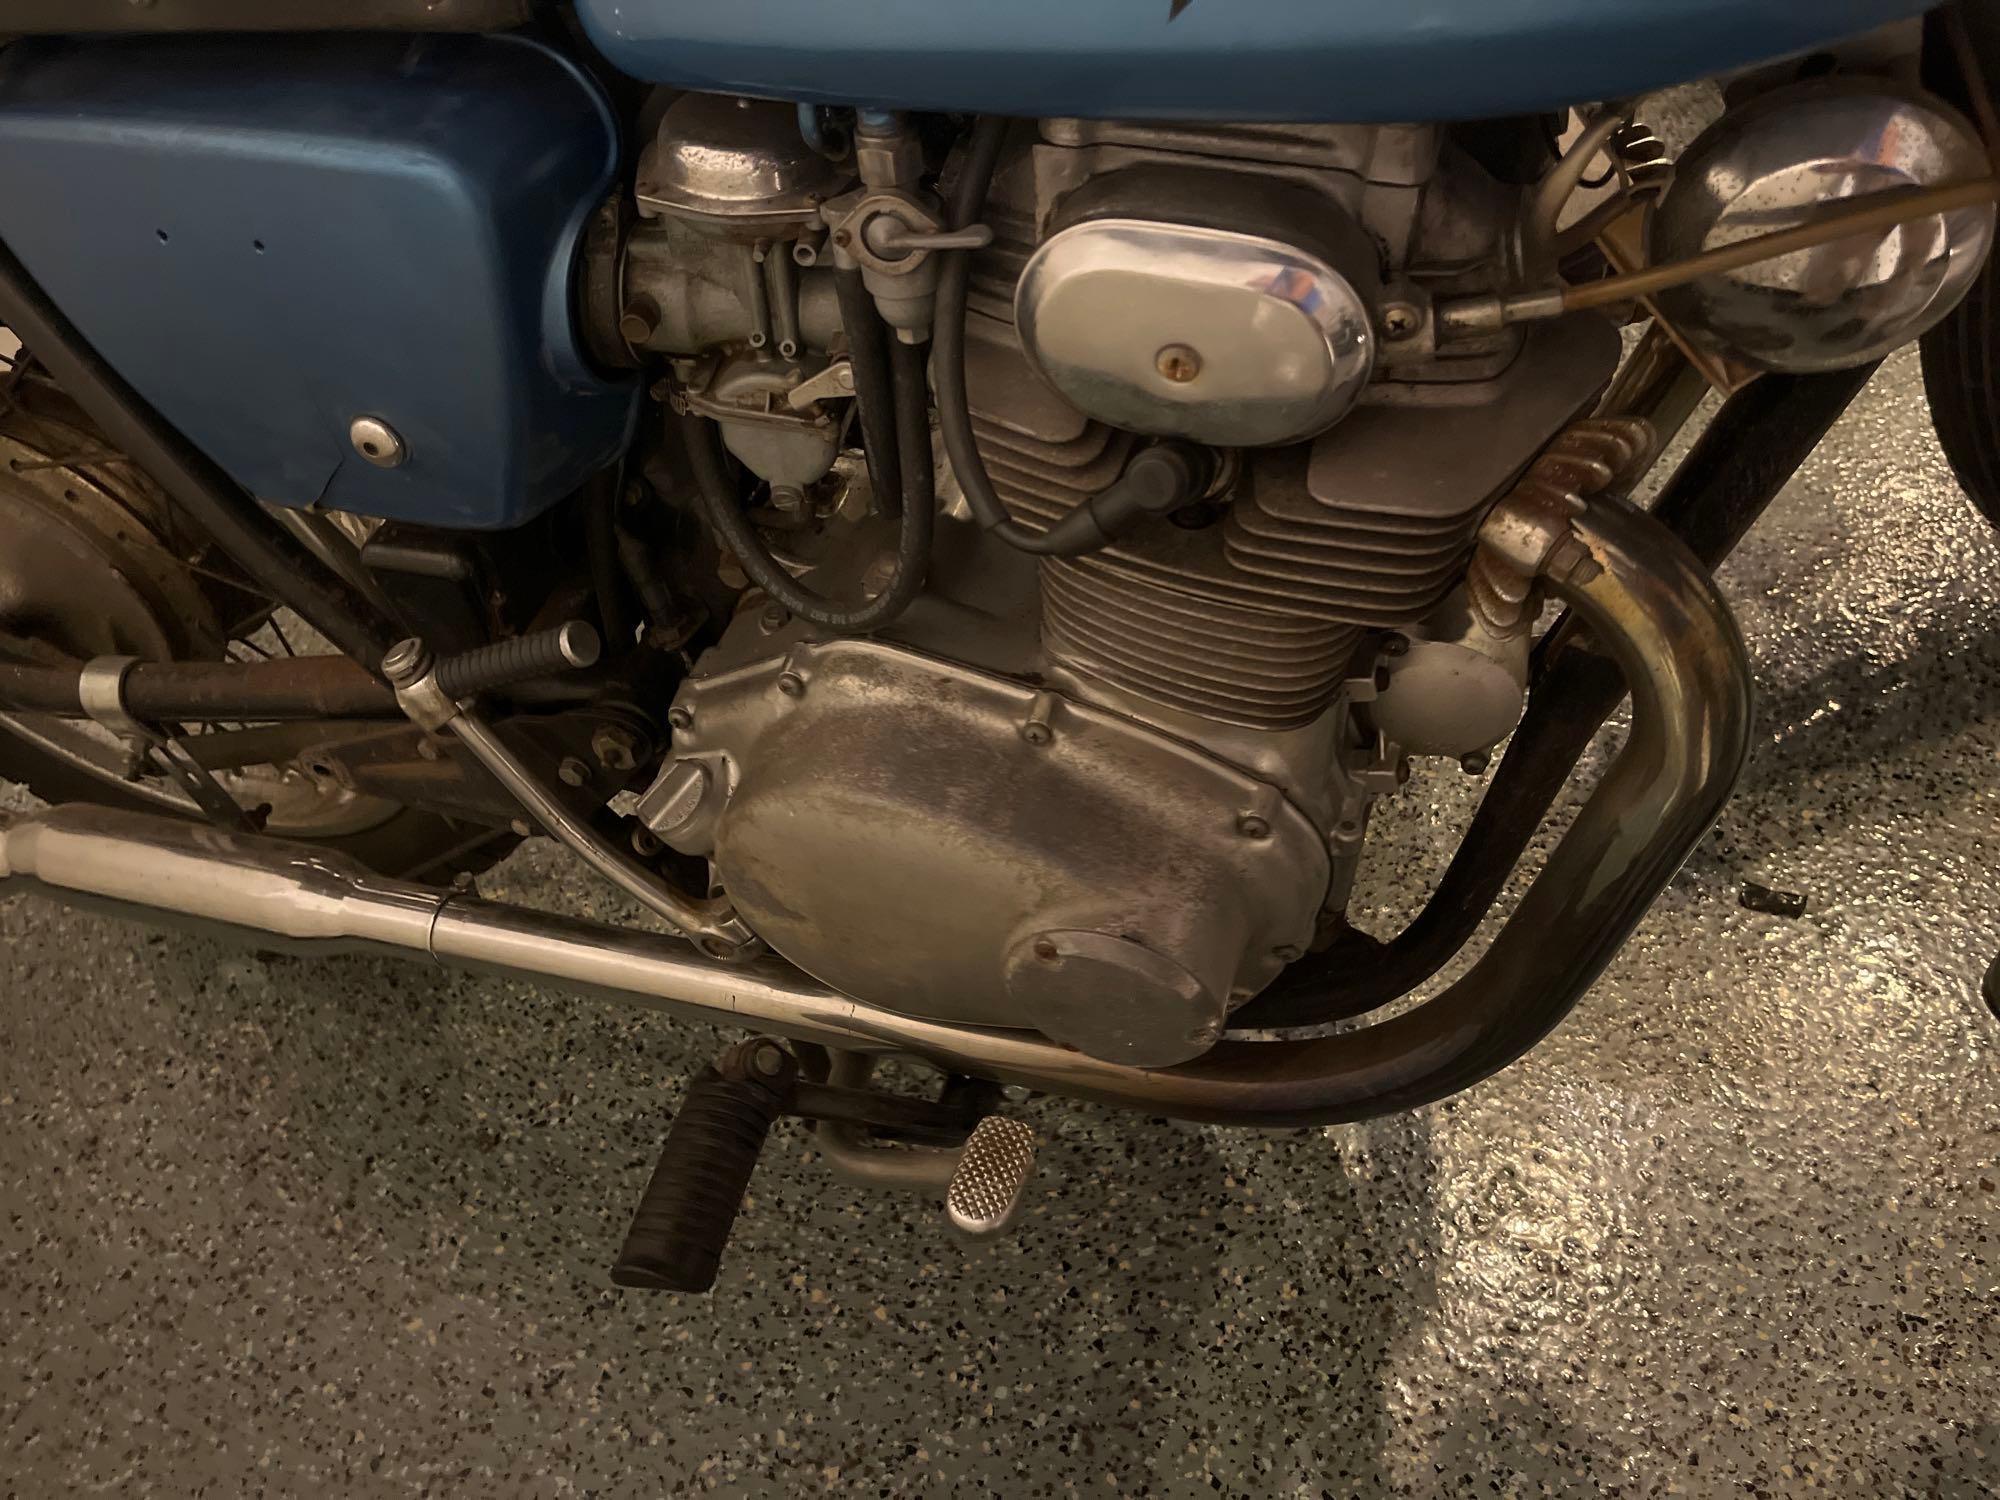 1972 Honda CL350 K3 with title